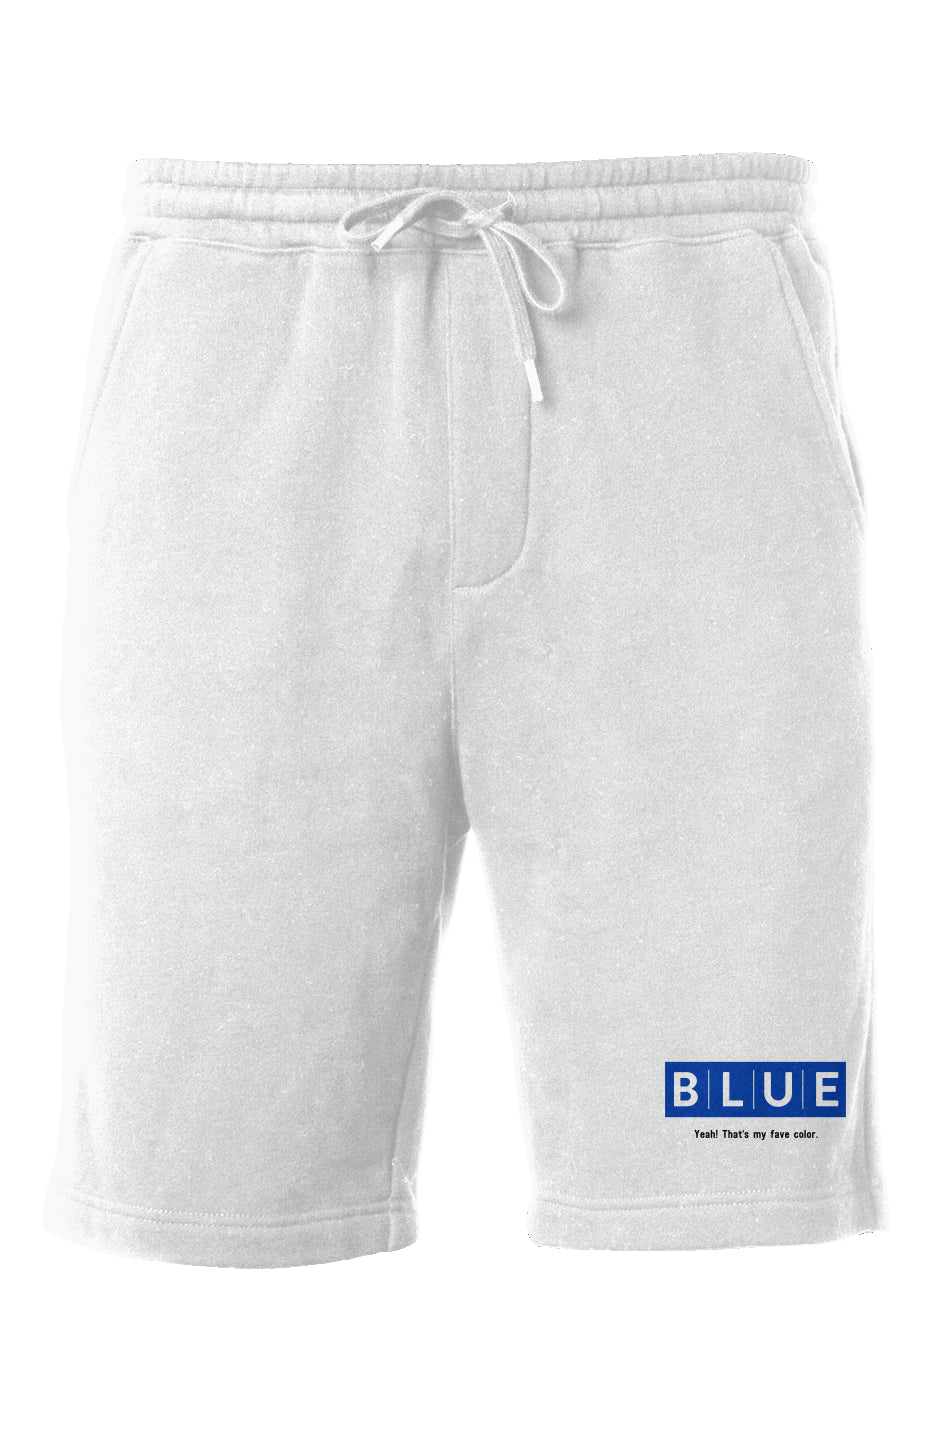 Blue Collection Midweight Fleece Shorts